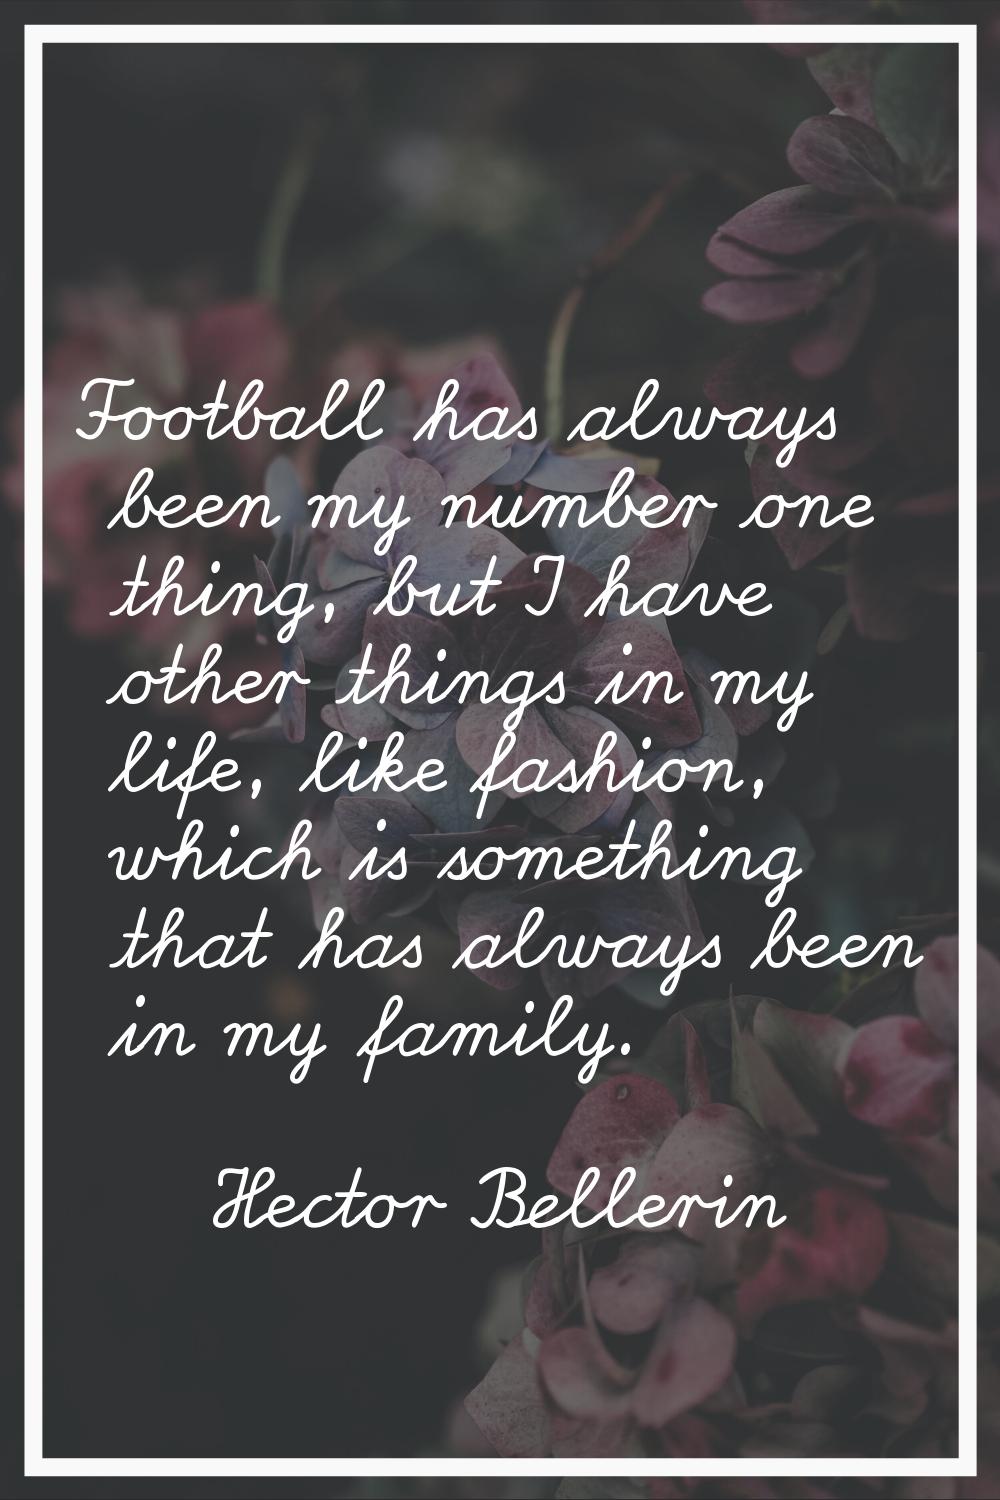 Football has always been my number one thing, but I have other things in my life, like fashion, whi